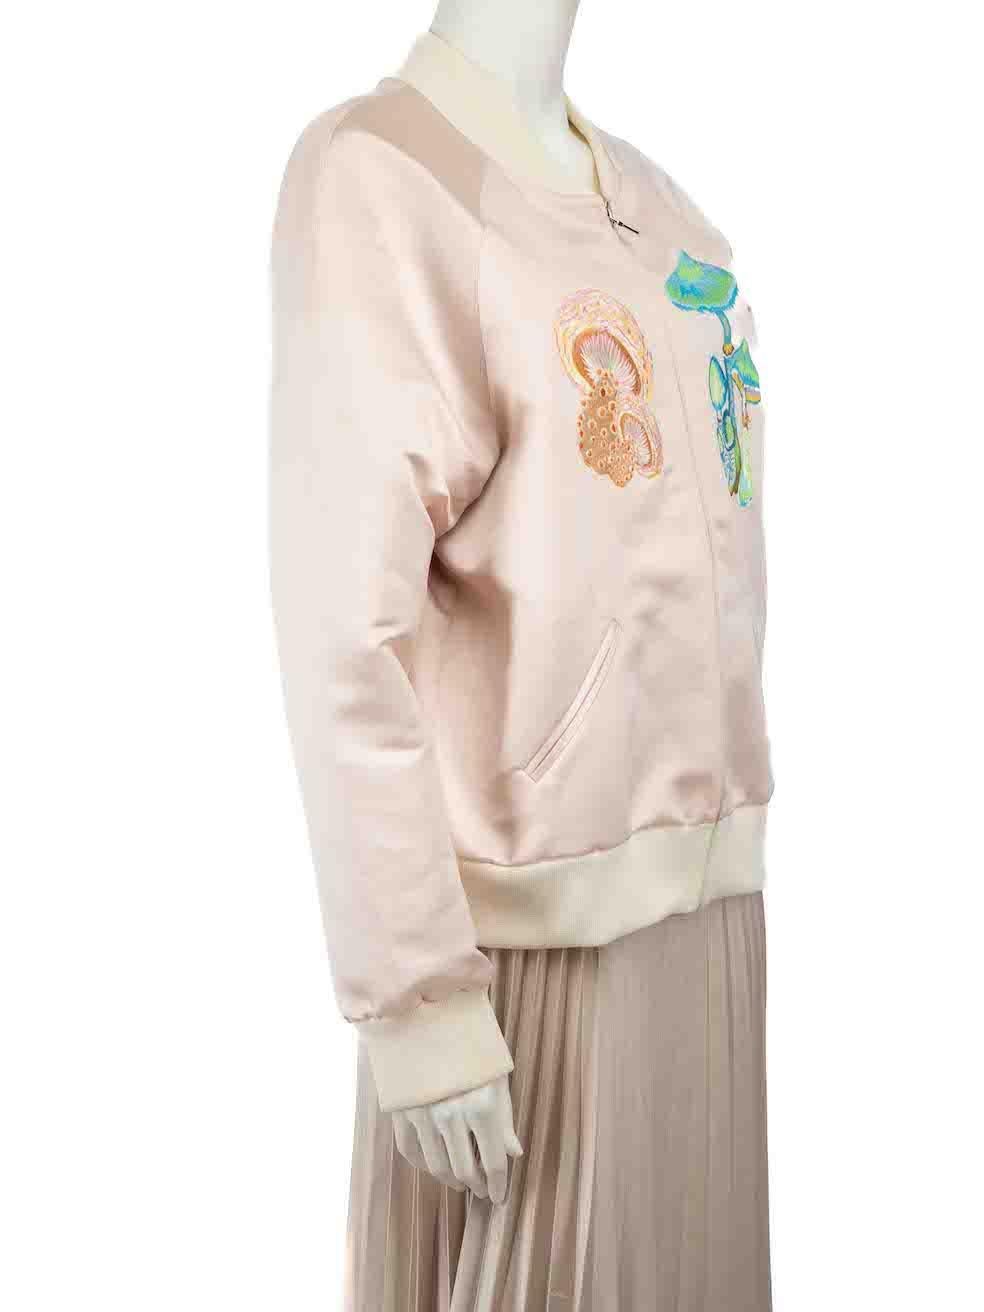 CONDITION is Good. General wear to jacket is evident. Moderate signs of wear to the fabric surface with light discoloured marks seen throughout on this used Rodarte designer resale item.
 
 Details
 Pink
 Silk
 Bomber jacket
 Mushroom embroidery
